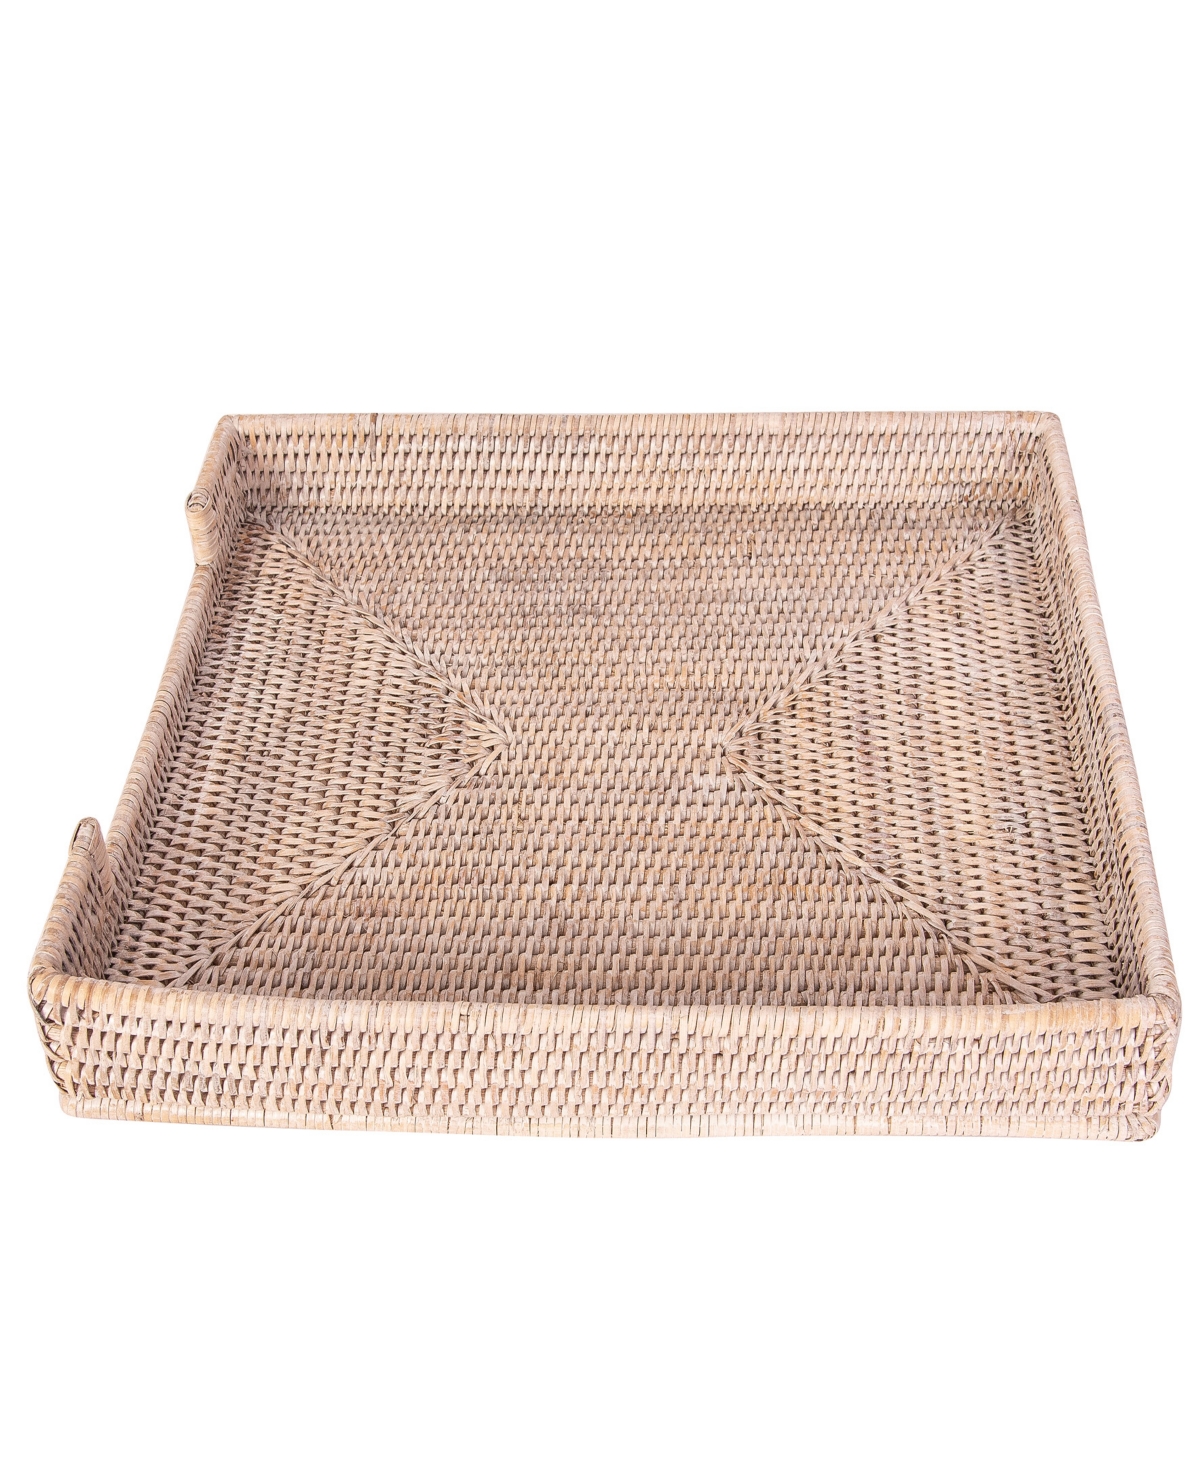 Artifacts Trading Company Artifacts Rattan Office Paper Tray In White Wash